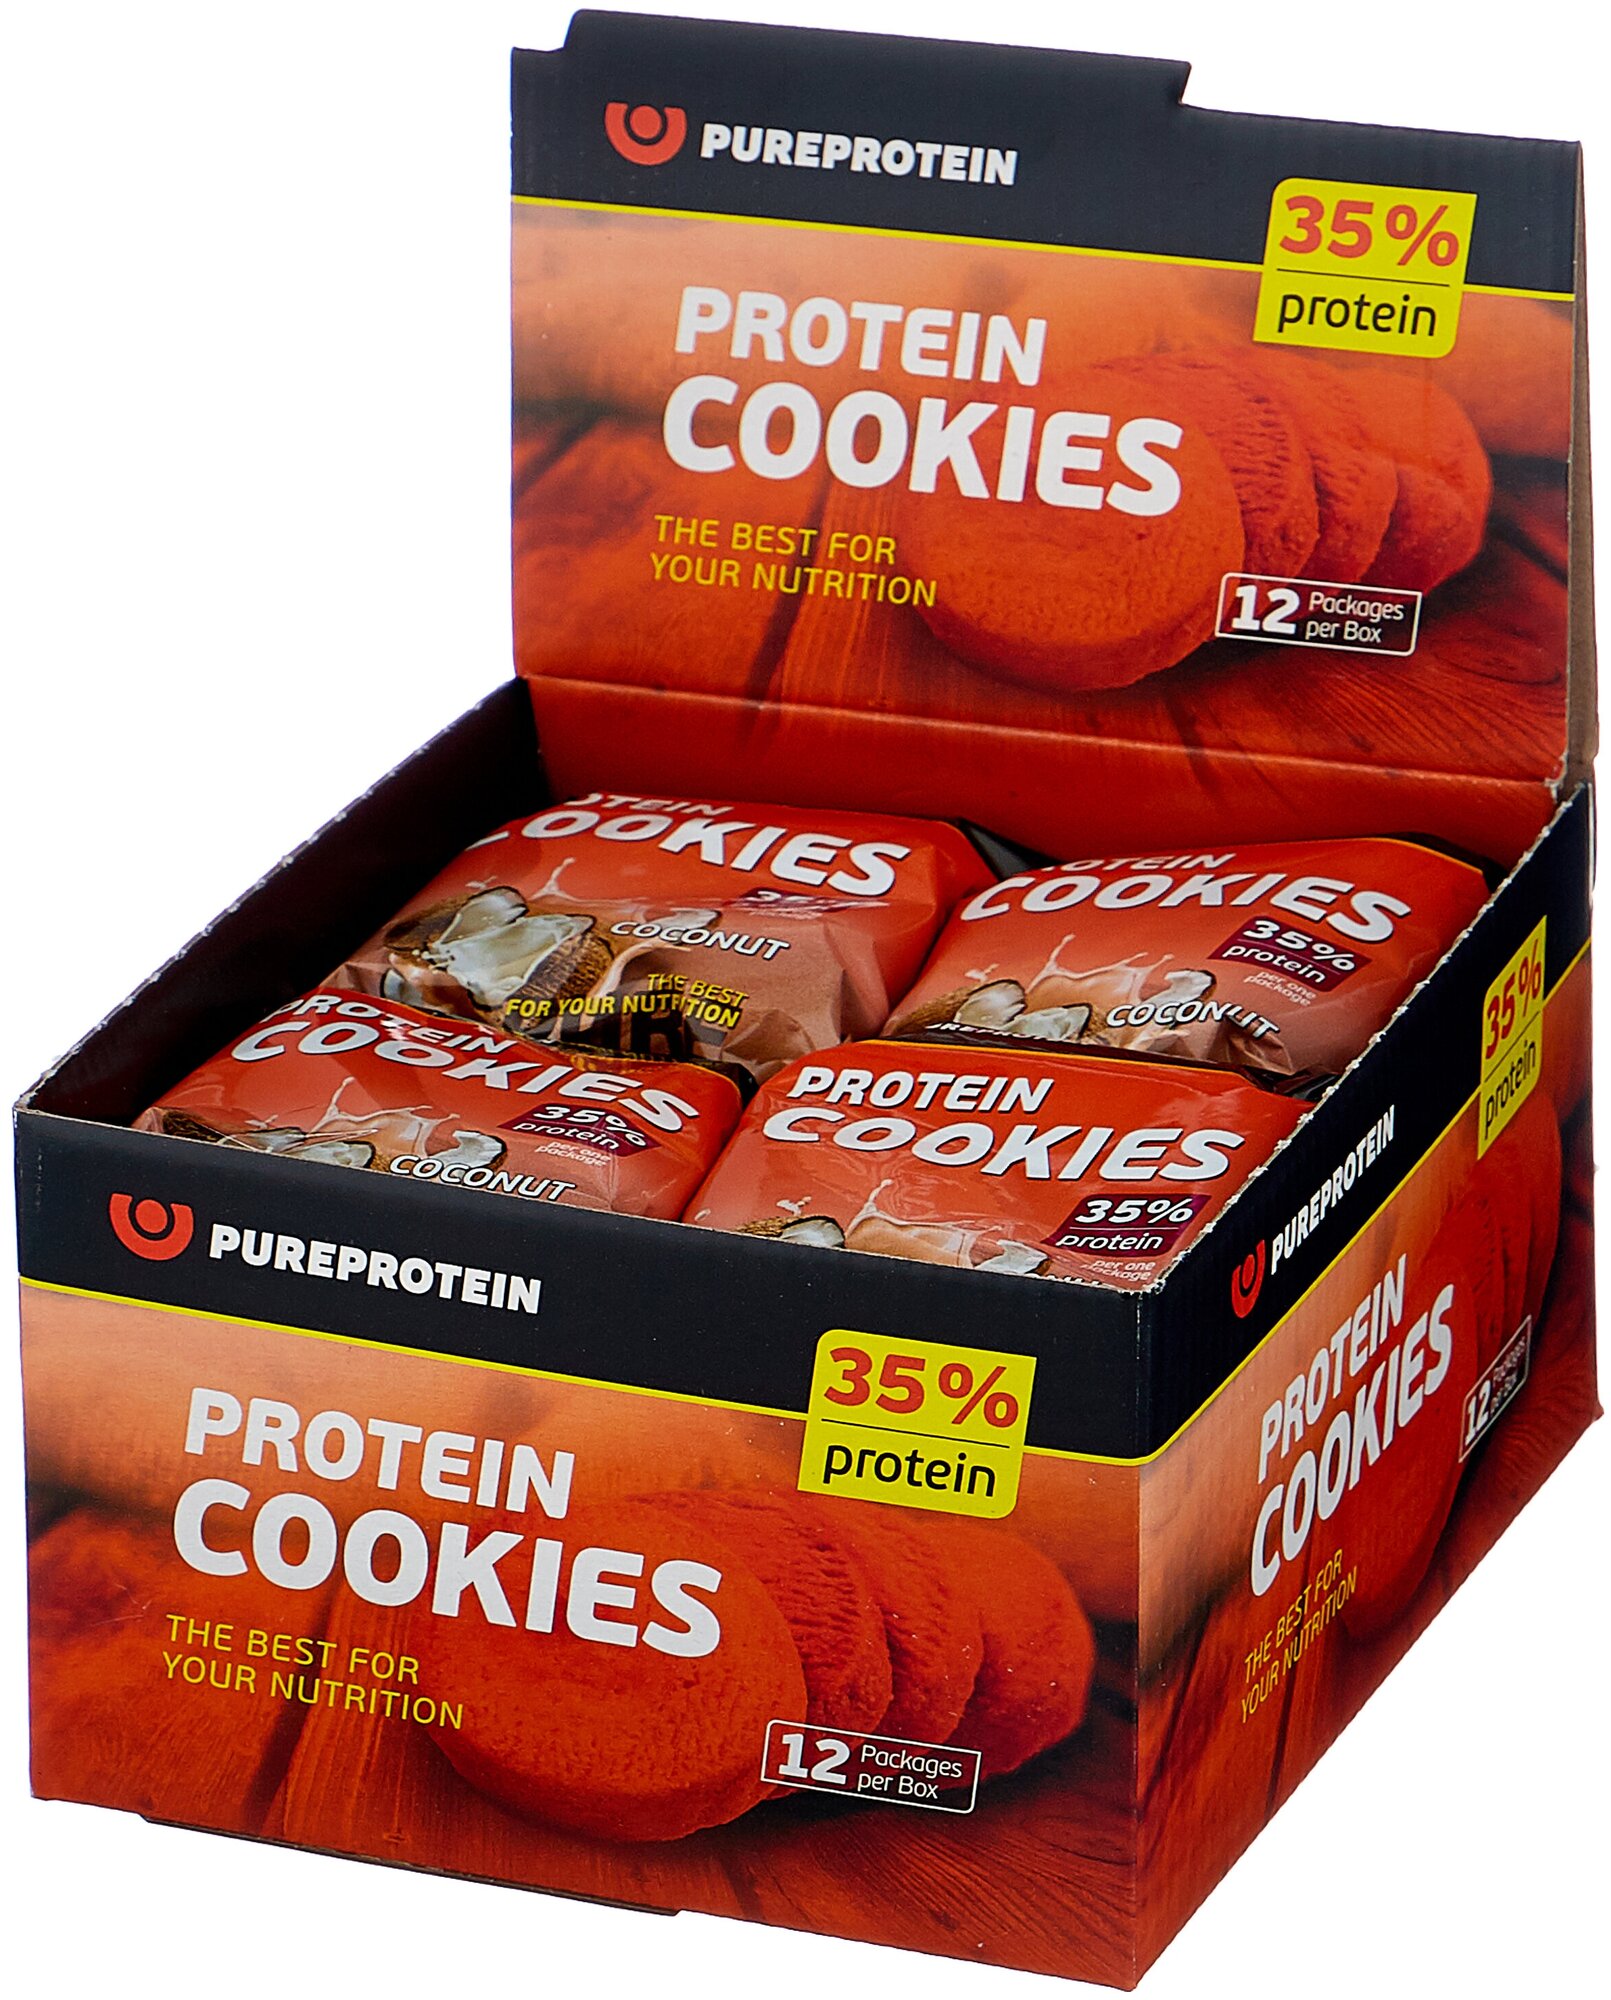   Protein Cookies  PureProtein : 